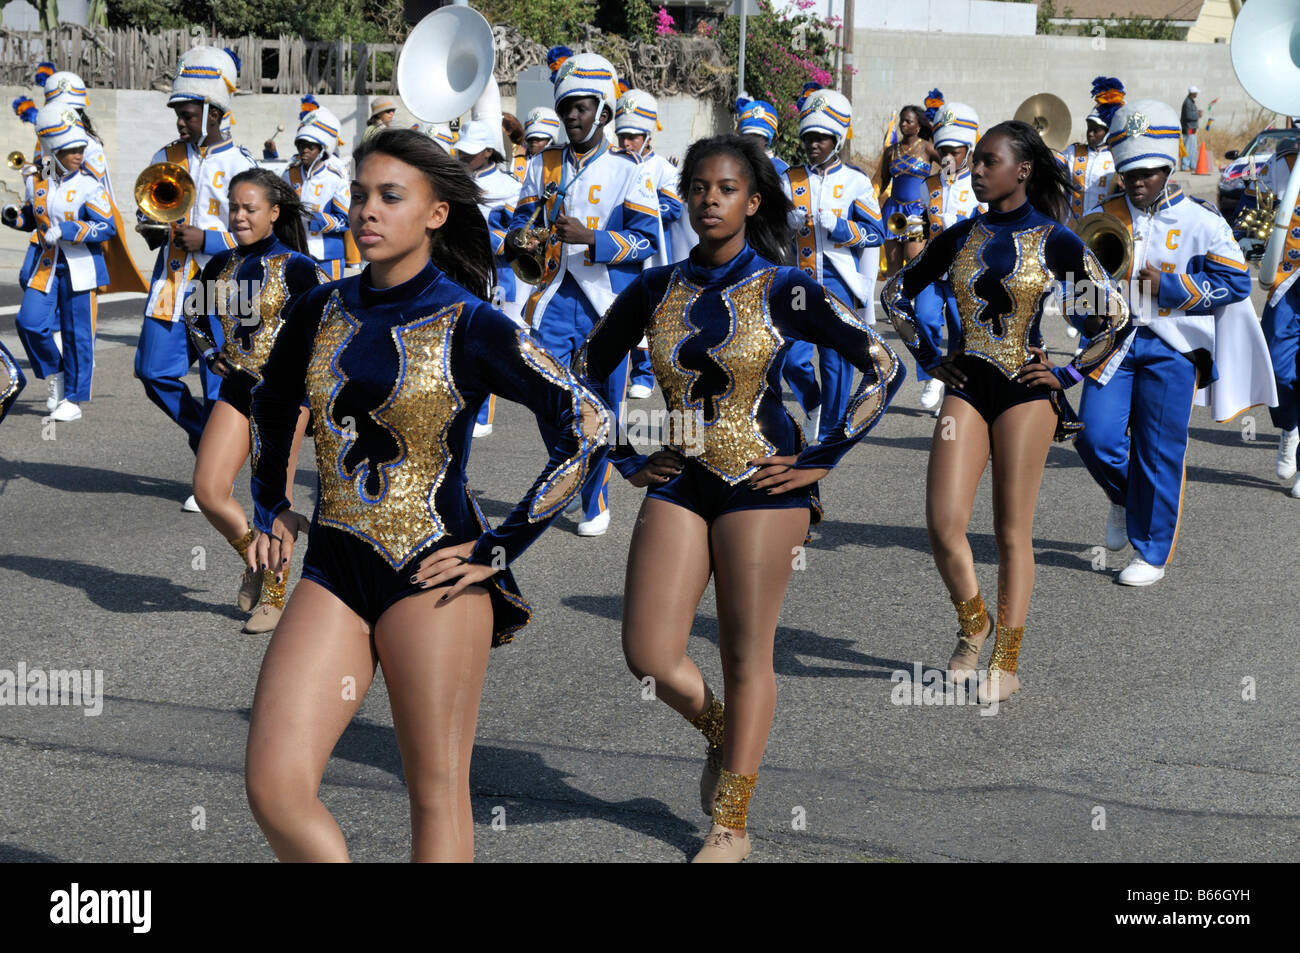 Girls Participating In The Yearly Caribbean Festival Parade Come Stock Photo Royalty Free Image